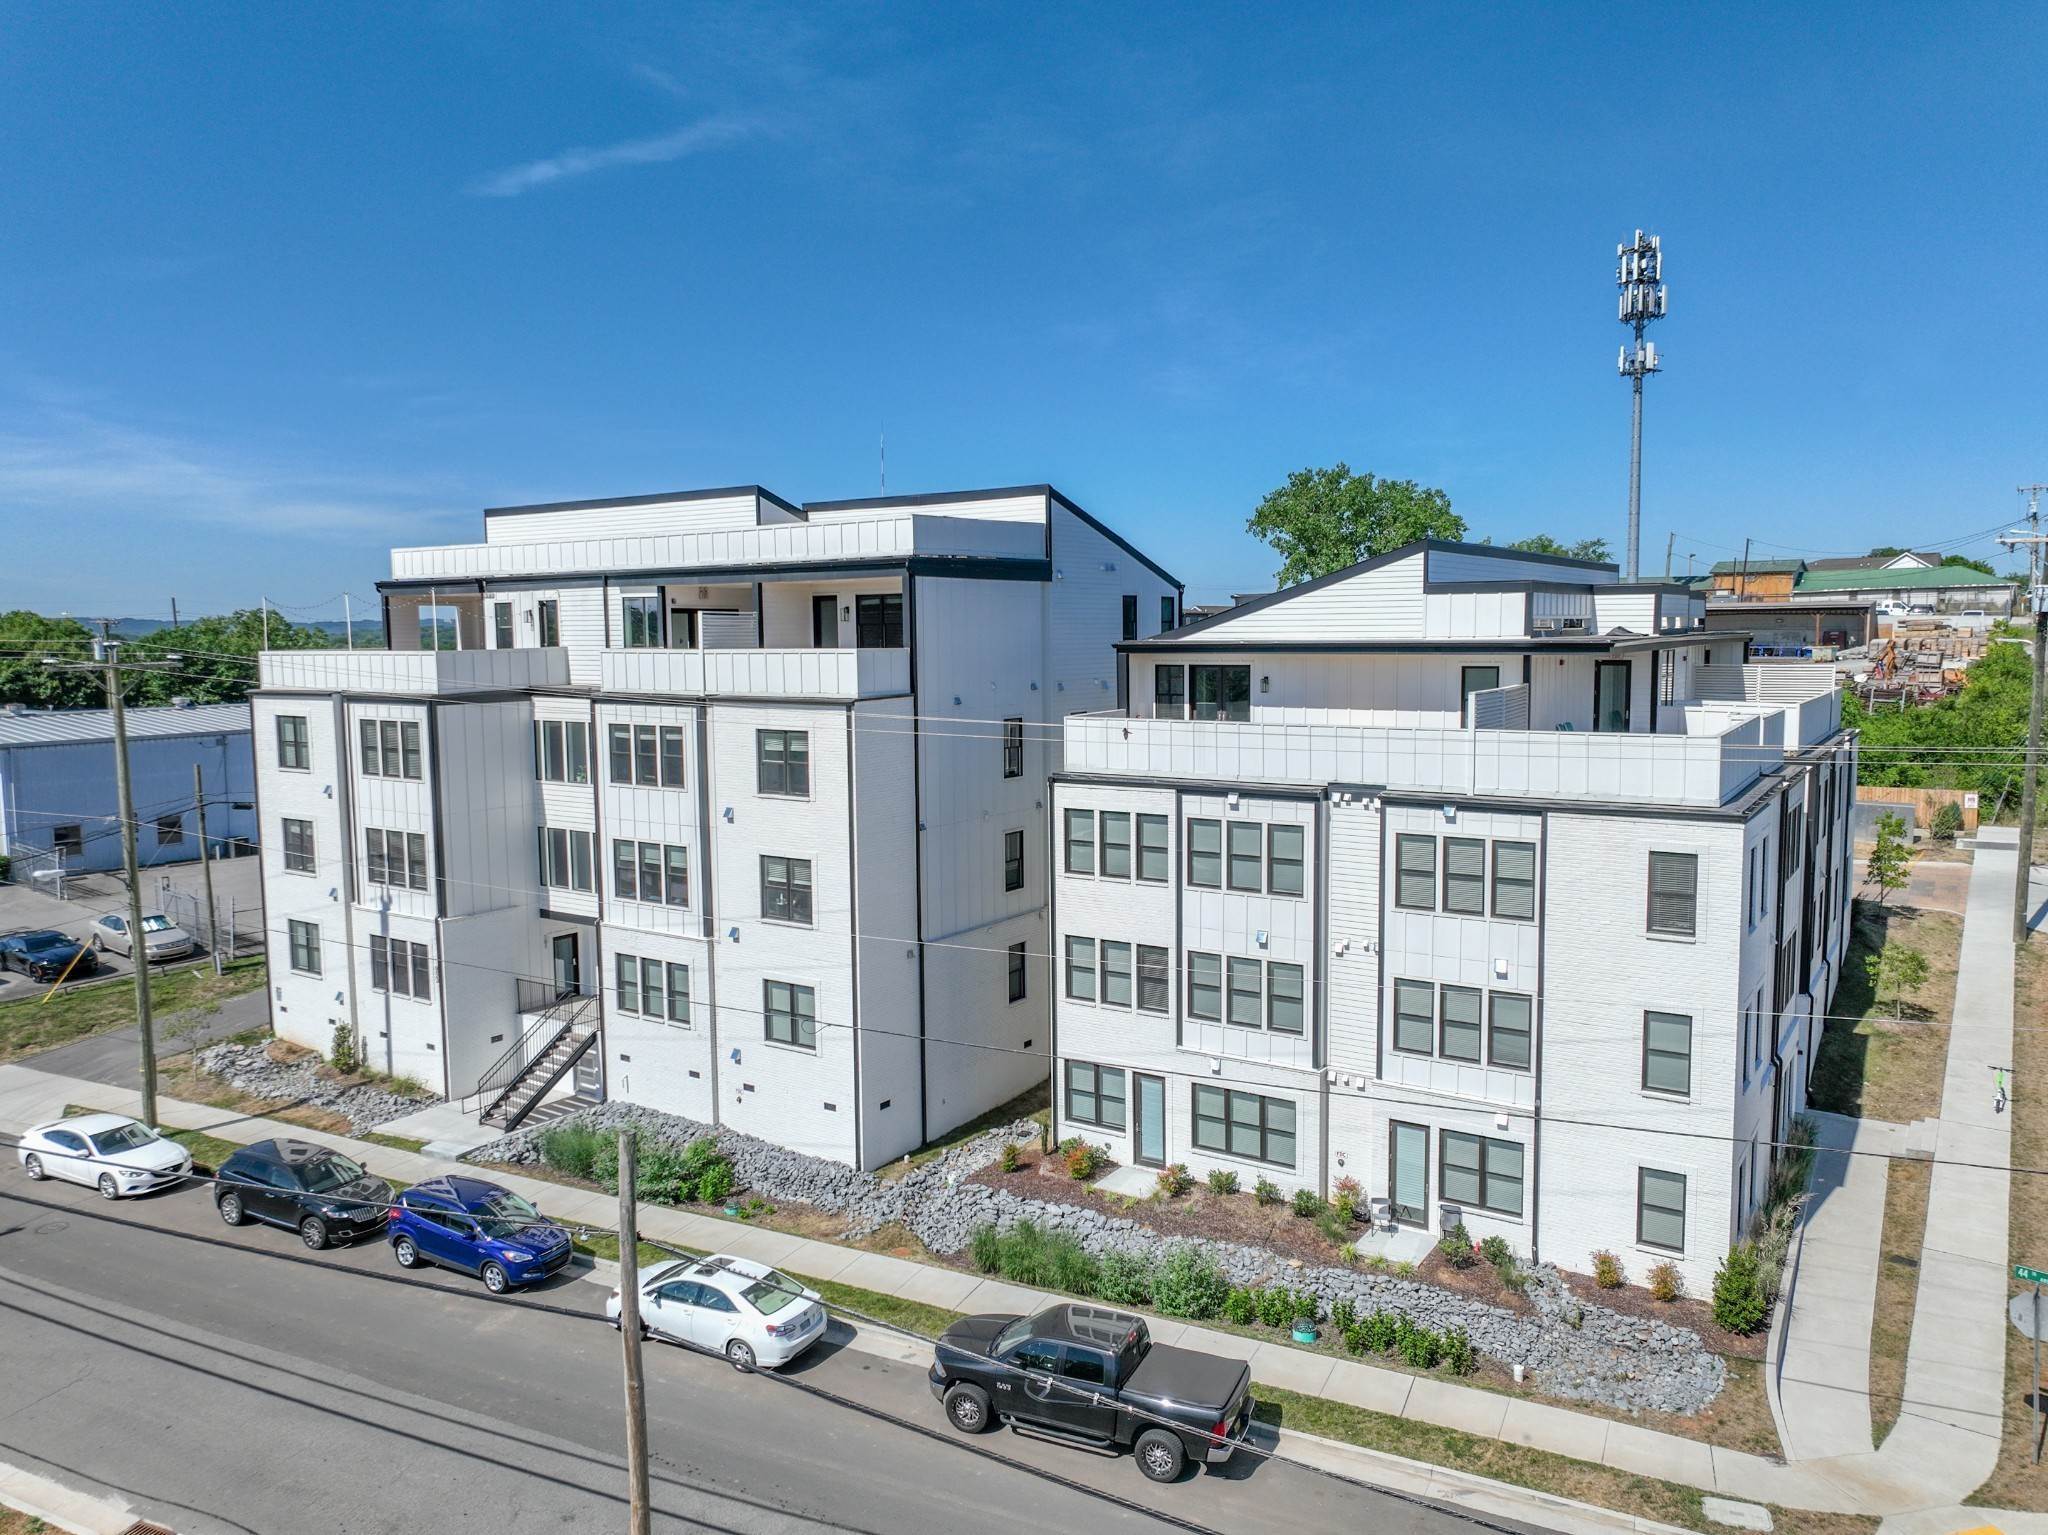 Lofts for Sale at 953 44th Ave, N Nashville, Tennessee 37209 United States